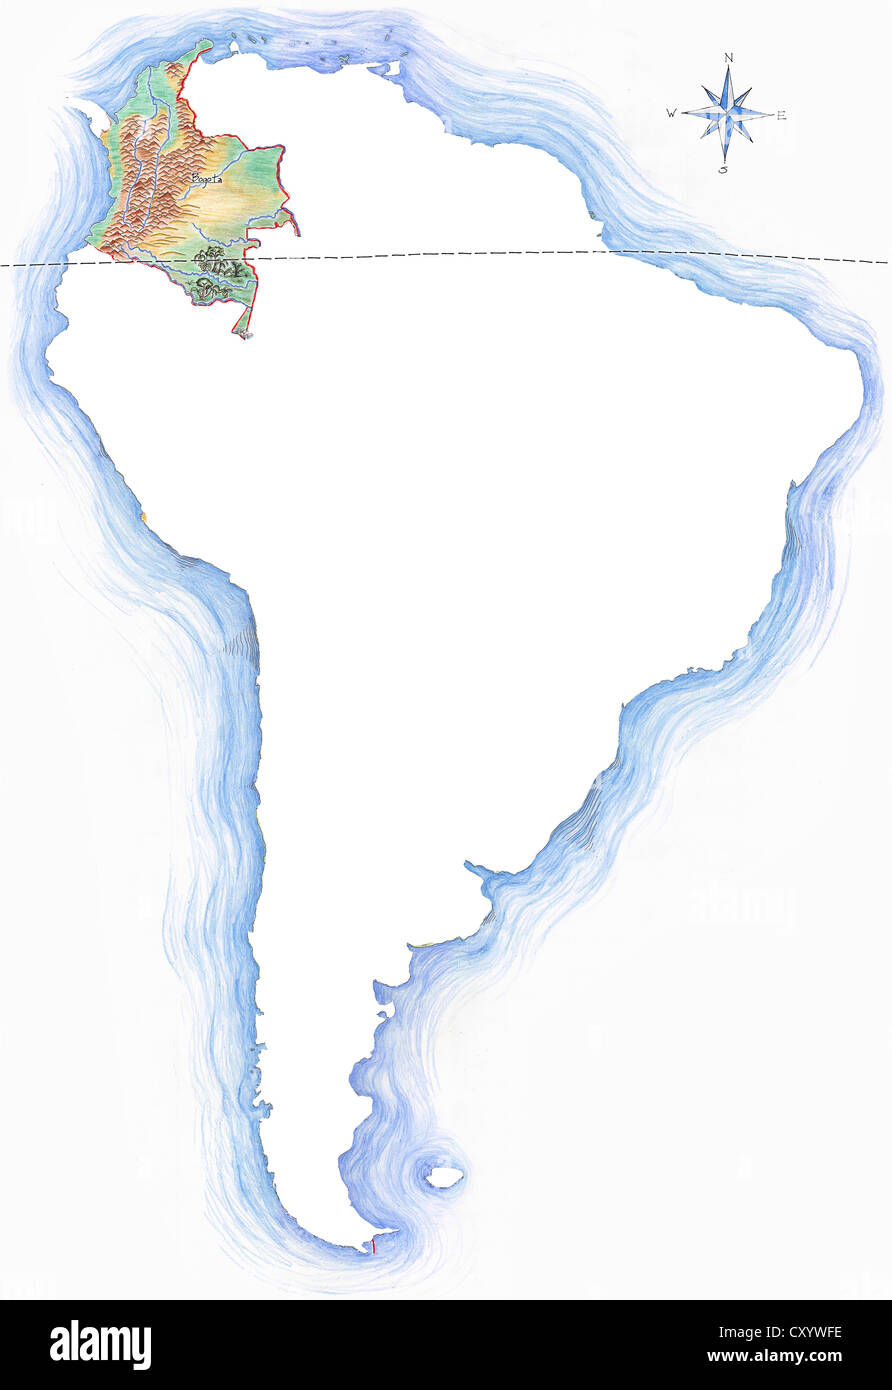 Highly detailed hand-drawn map of Colombia within the outline of South America with a compass rose and the equator Stock Photo